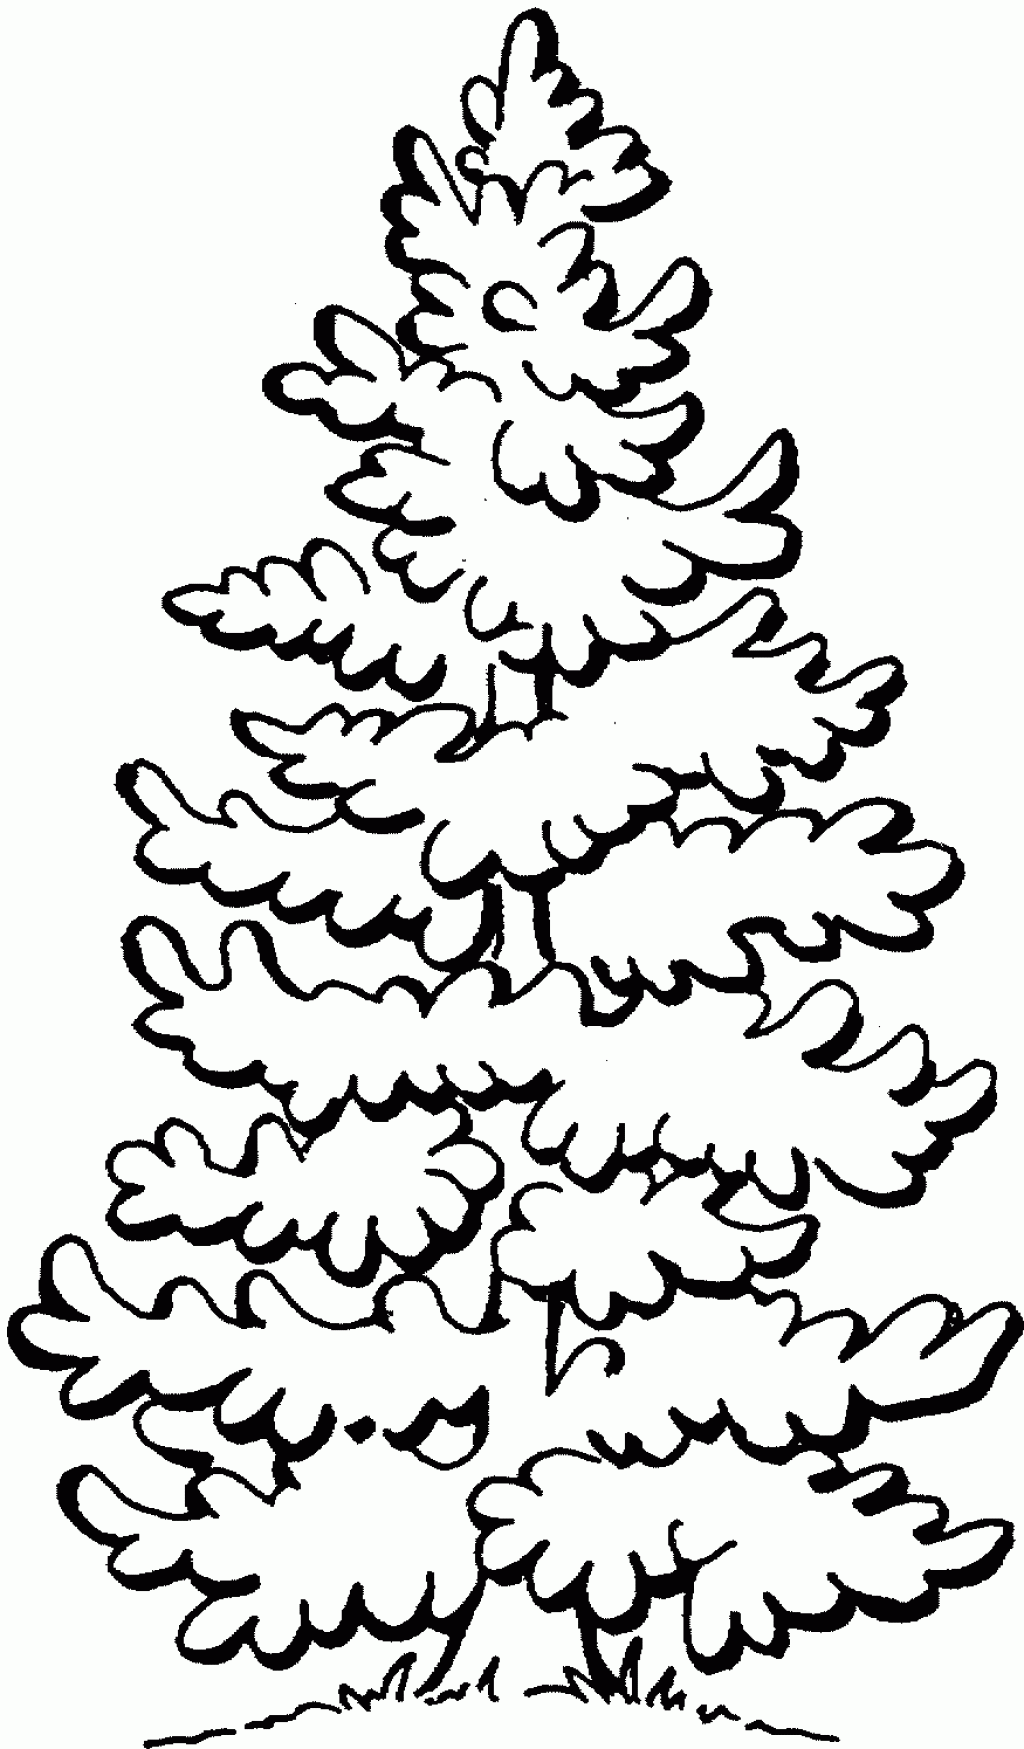 evergreen-tree-outline-coloring-home